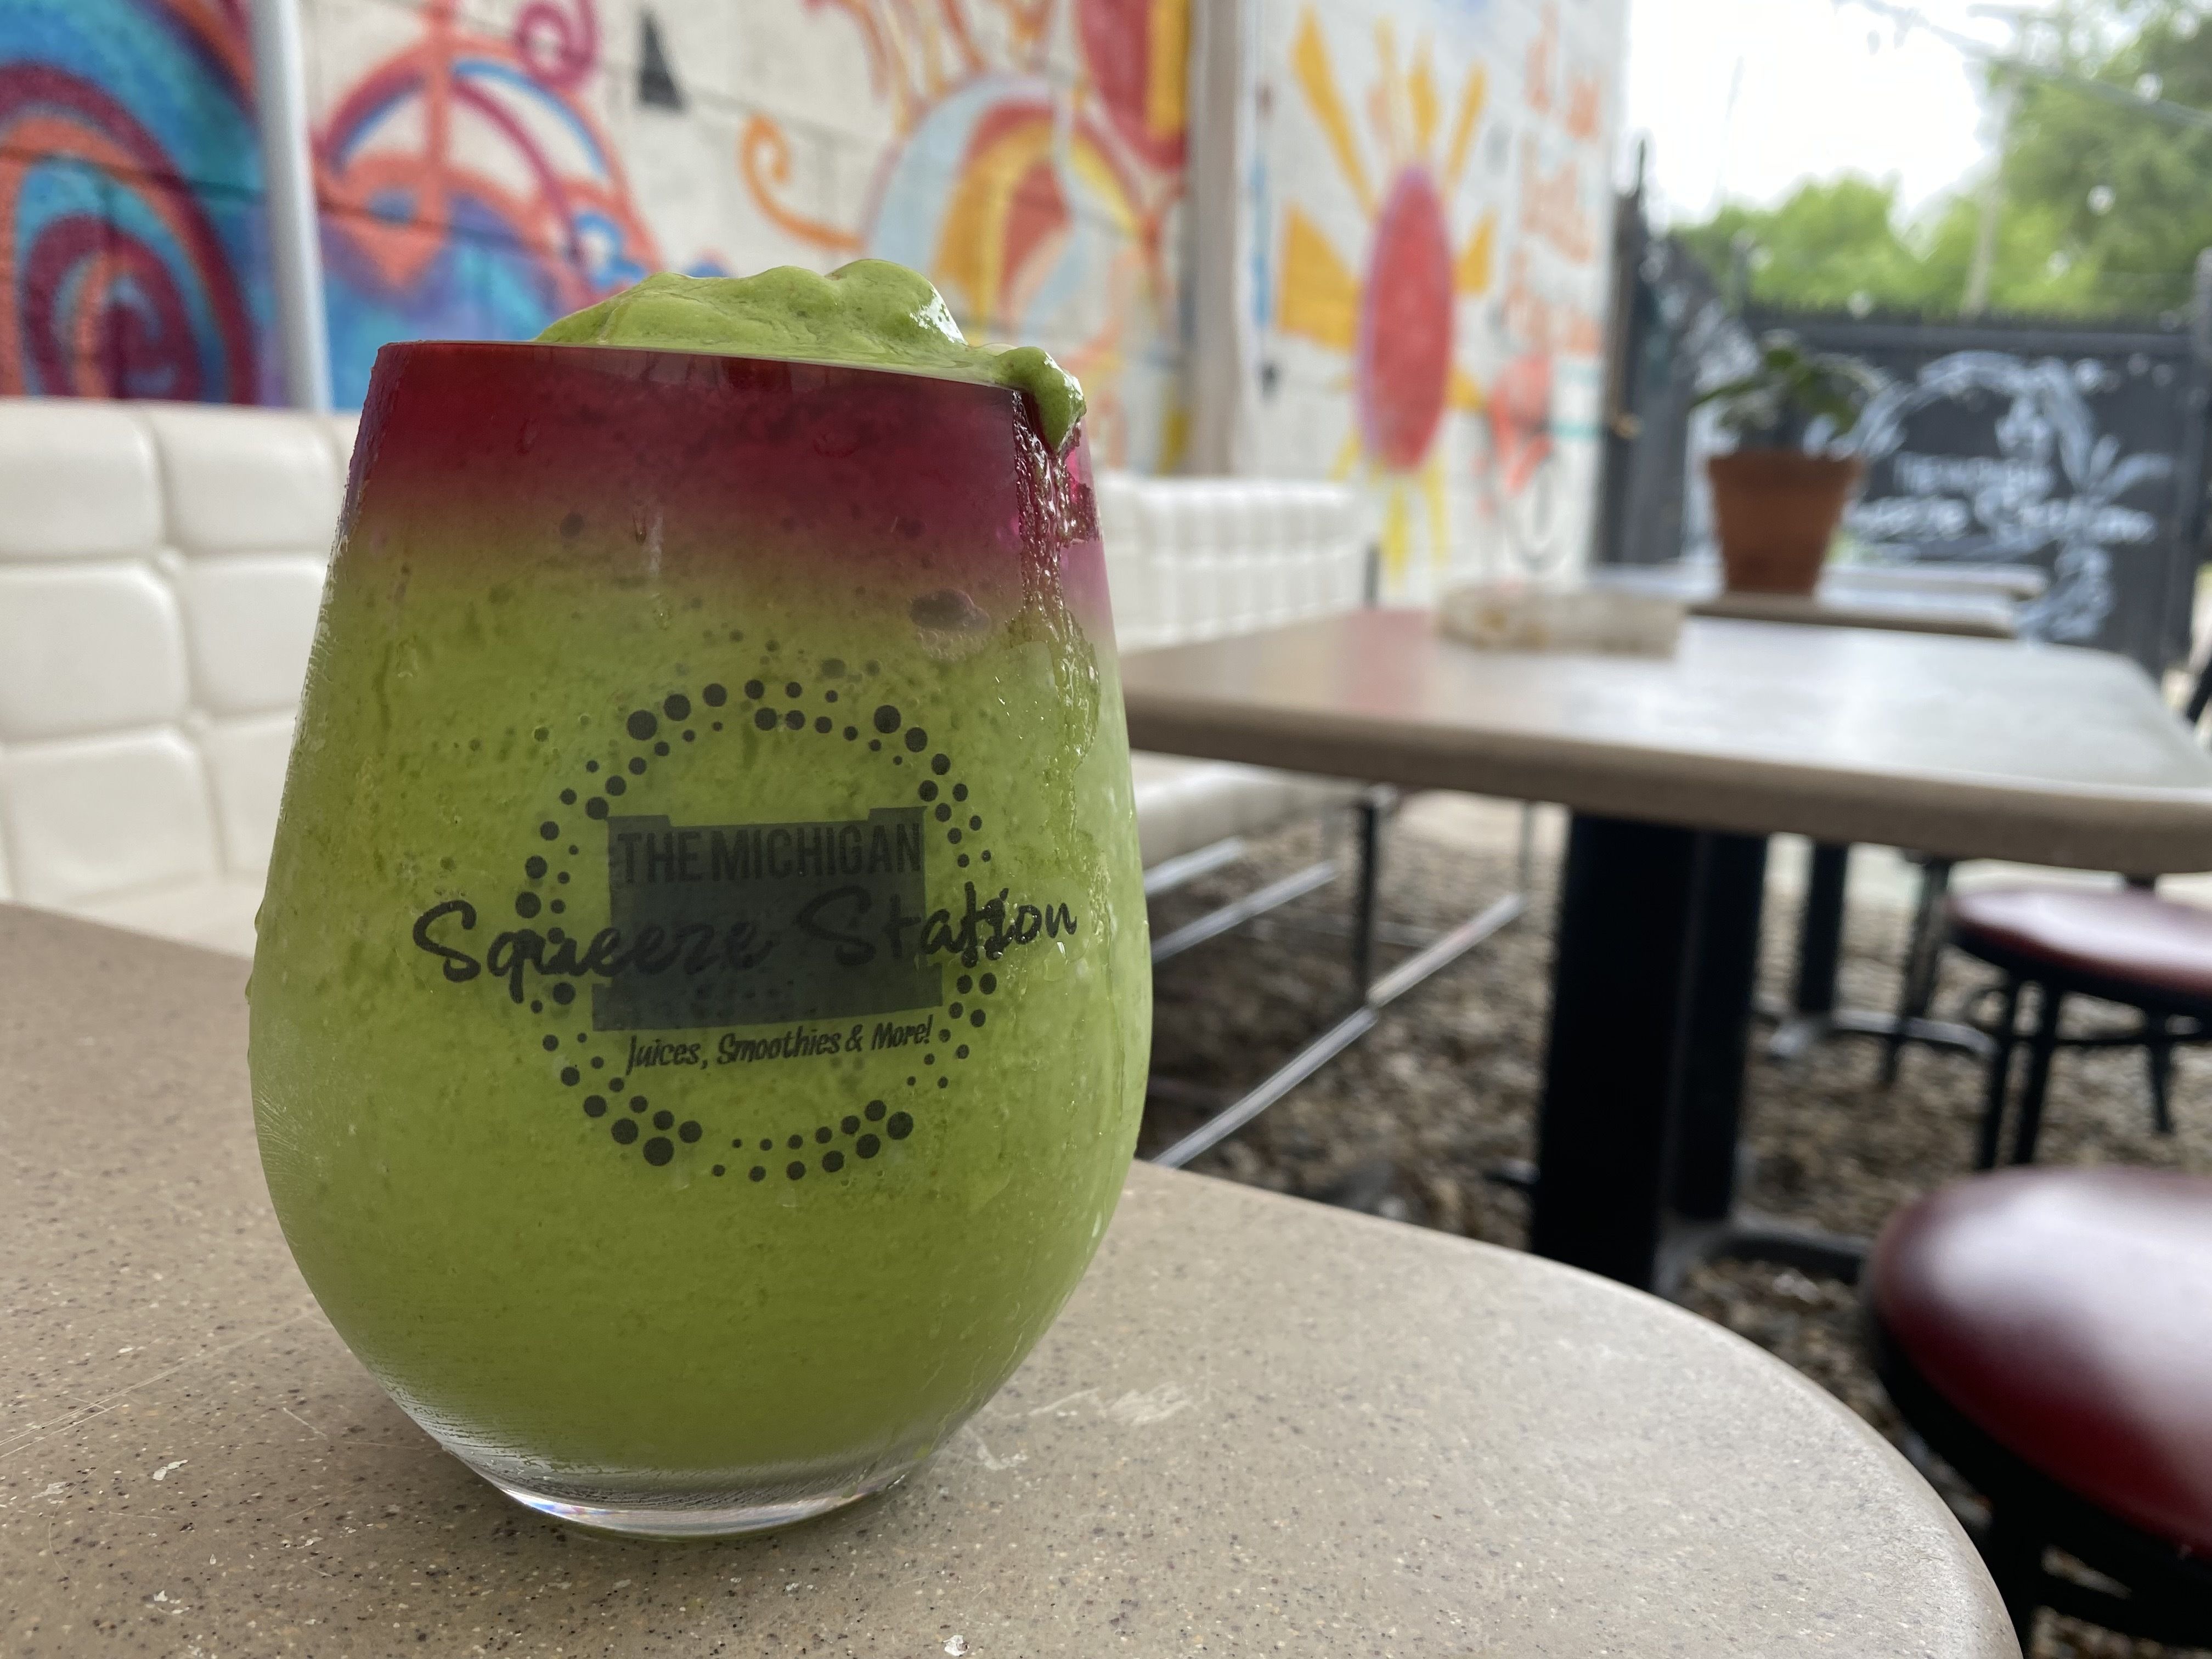 A smoothie in a glass labeled "Michigan Squeeze Station" is pictured in front of graffiti.